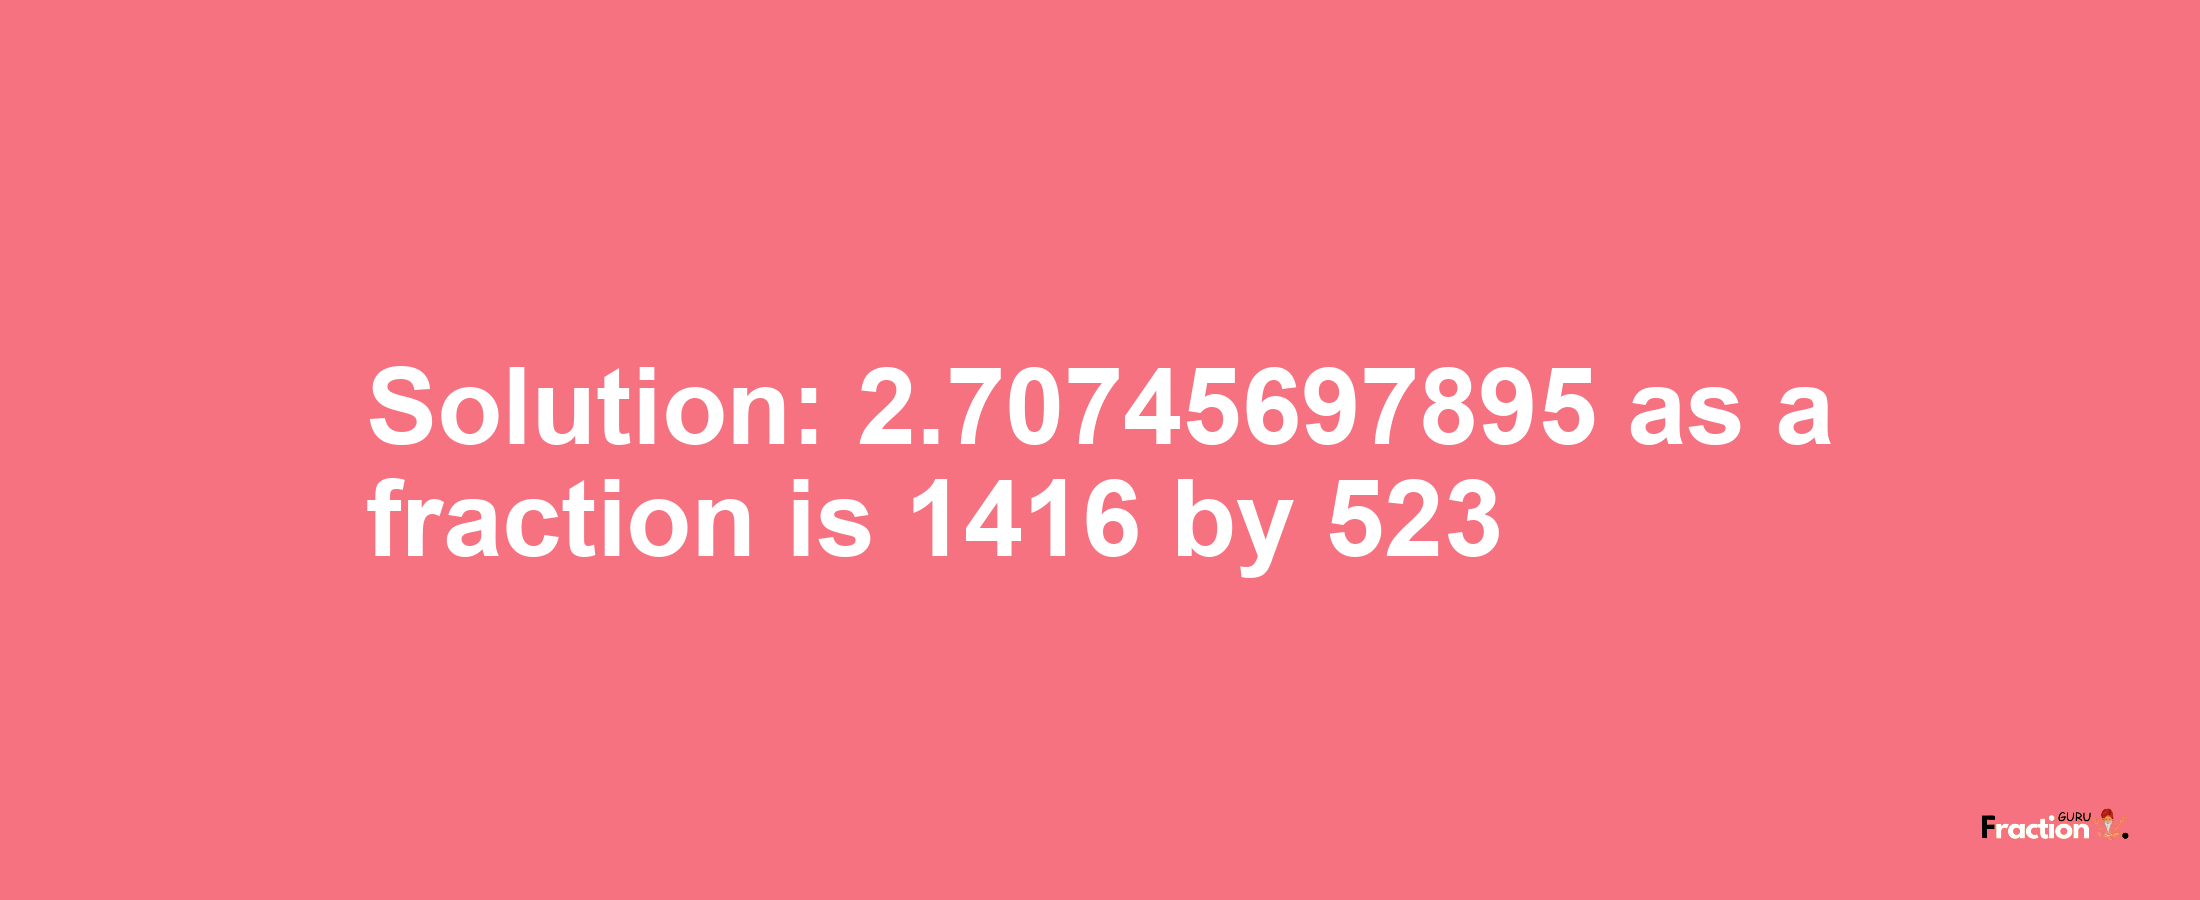 Solution:2.70745697895 as a fraction is 1416/523